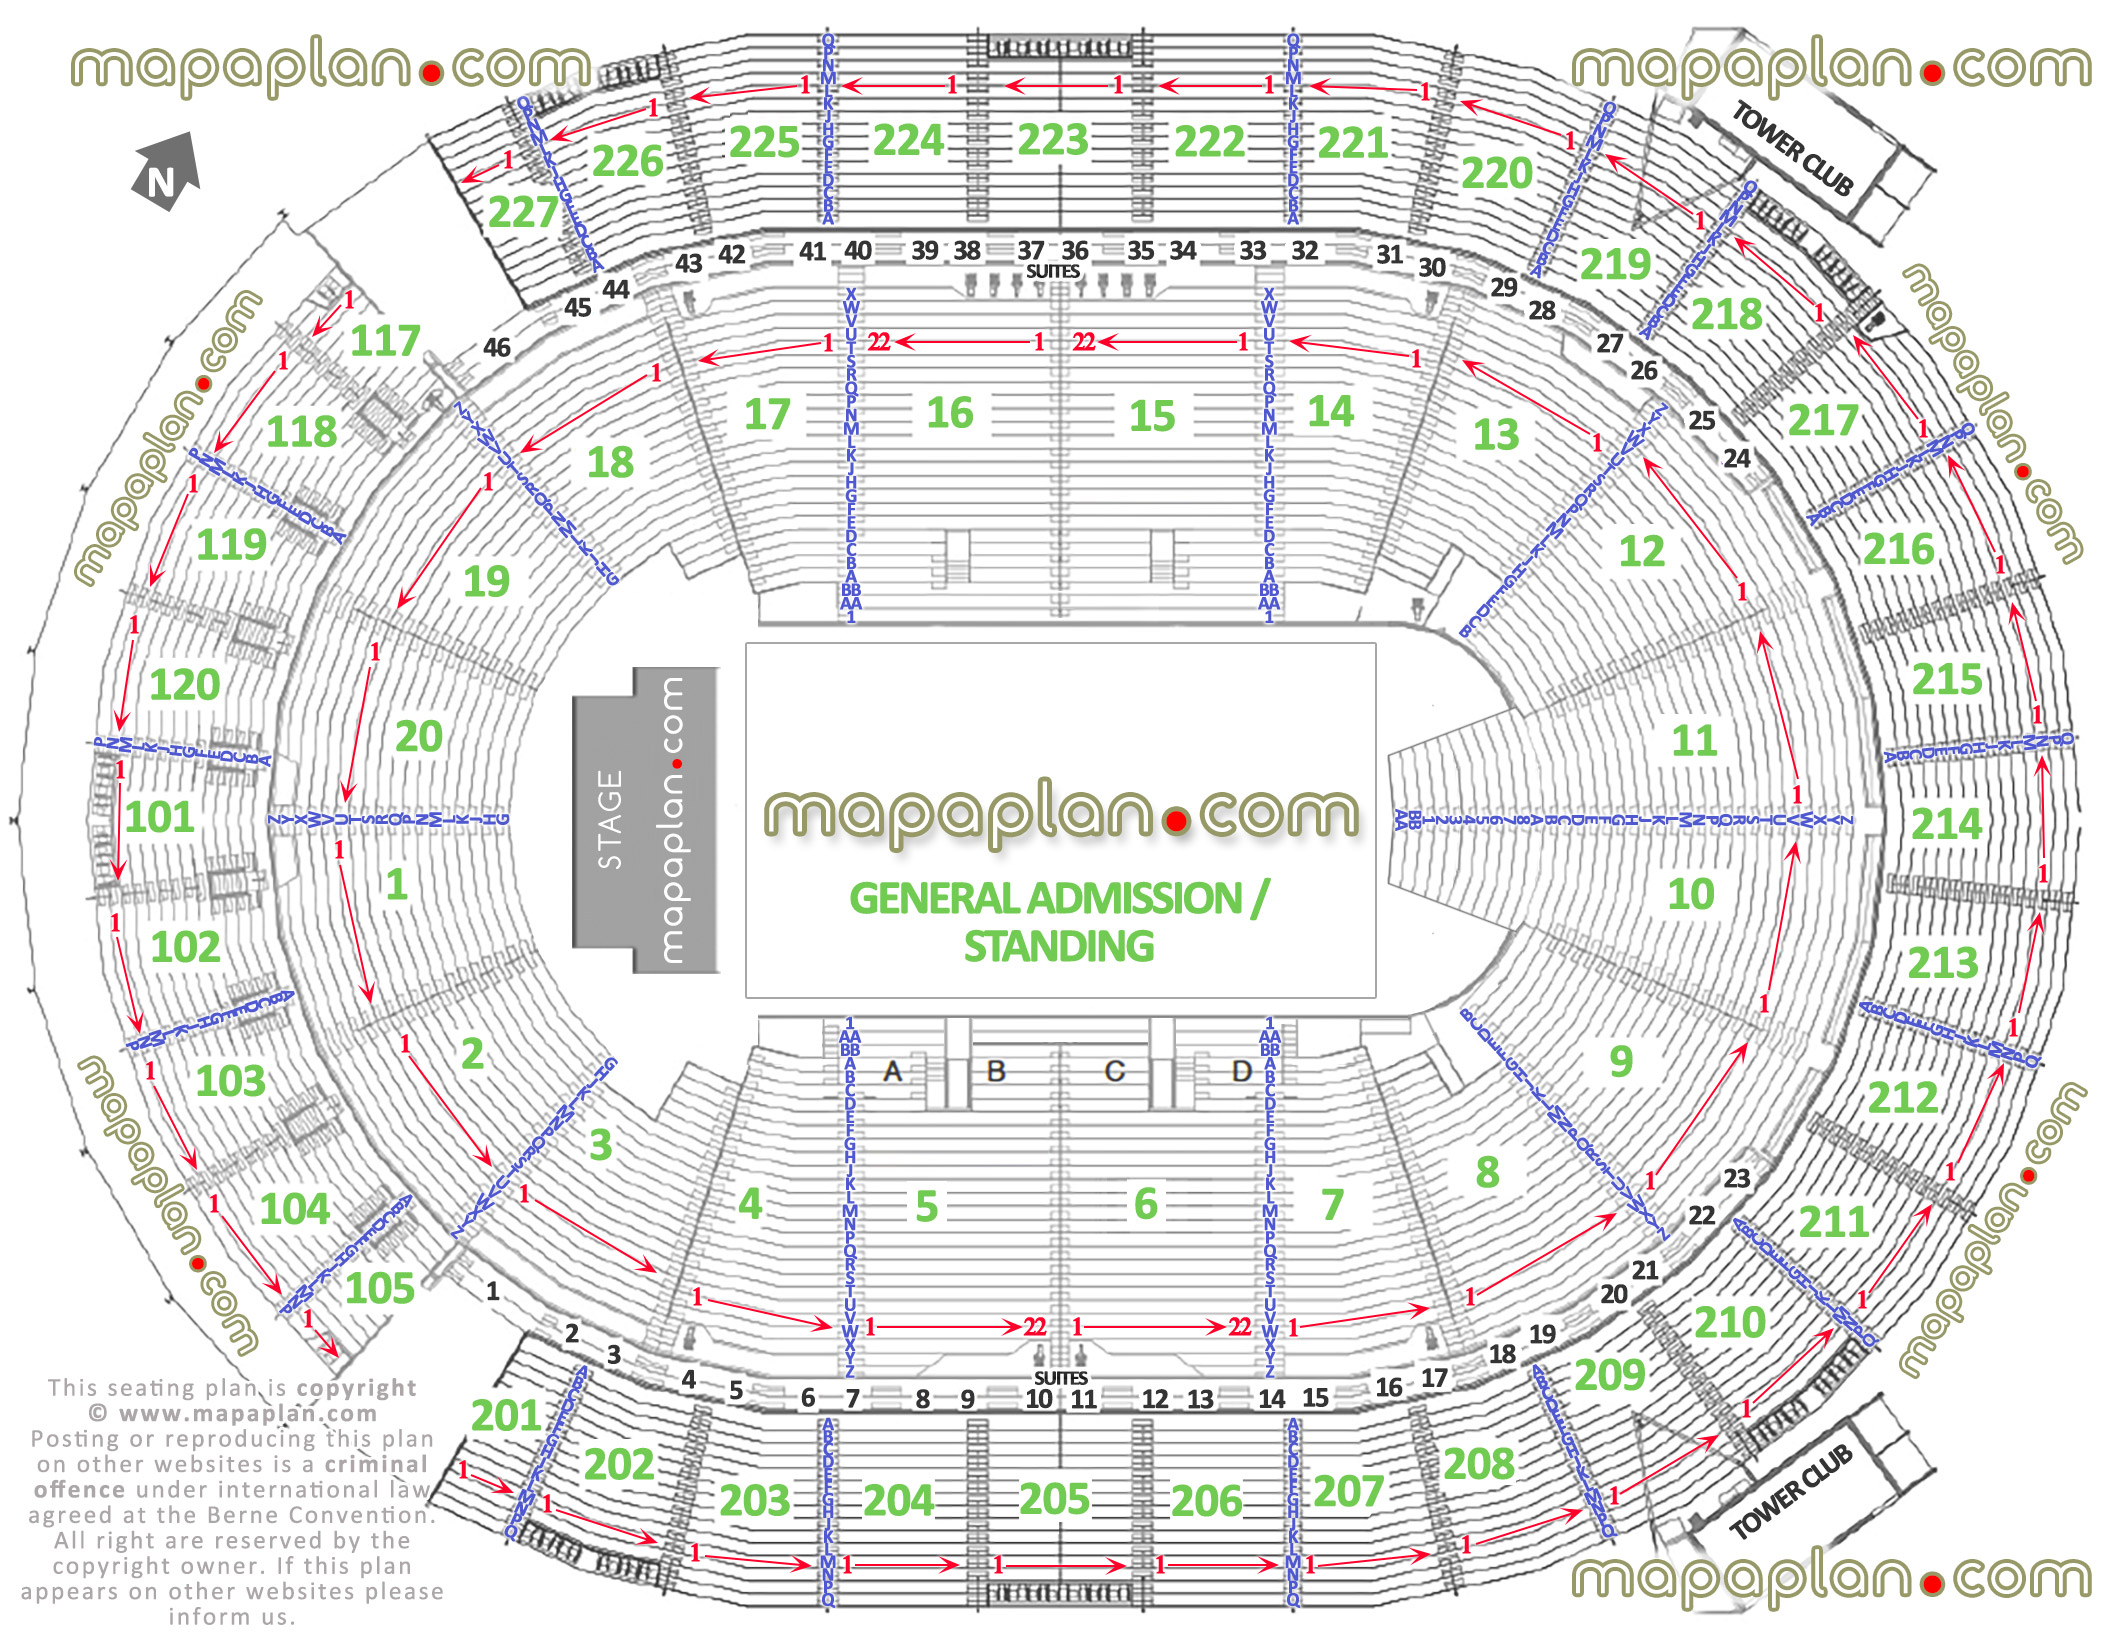 general admission ga floor standing concert capacity 3d printable plan new lv arena concert stage detailed floor pit plan sections best seat numbers selection information guide virtual interactive image map rows a b c d e f g h j k l m n p q r s t u v w x y z aa bb Las Vegas New T-Mobile Arena MGM-AEG seating chart